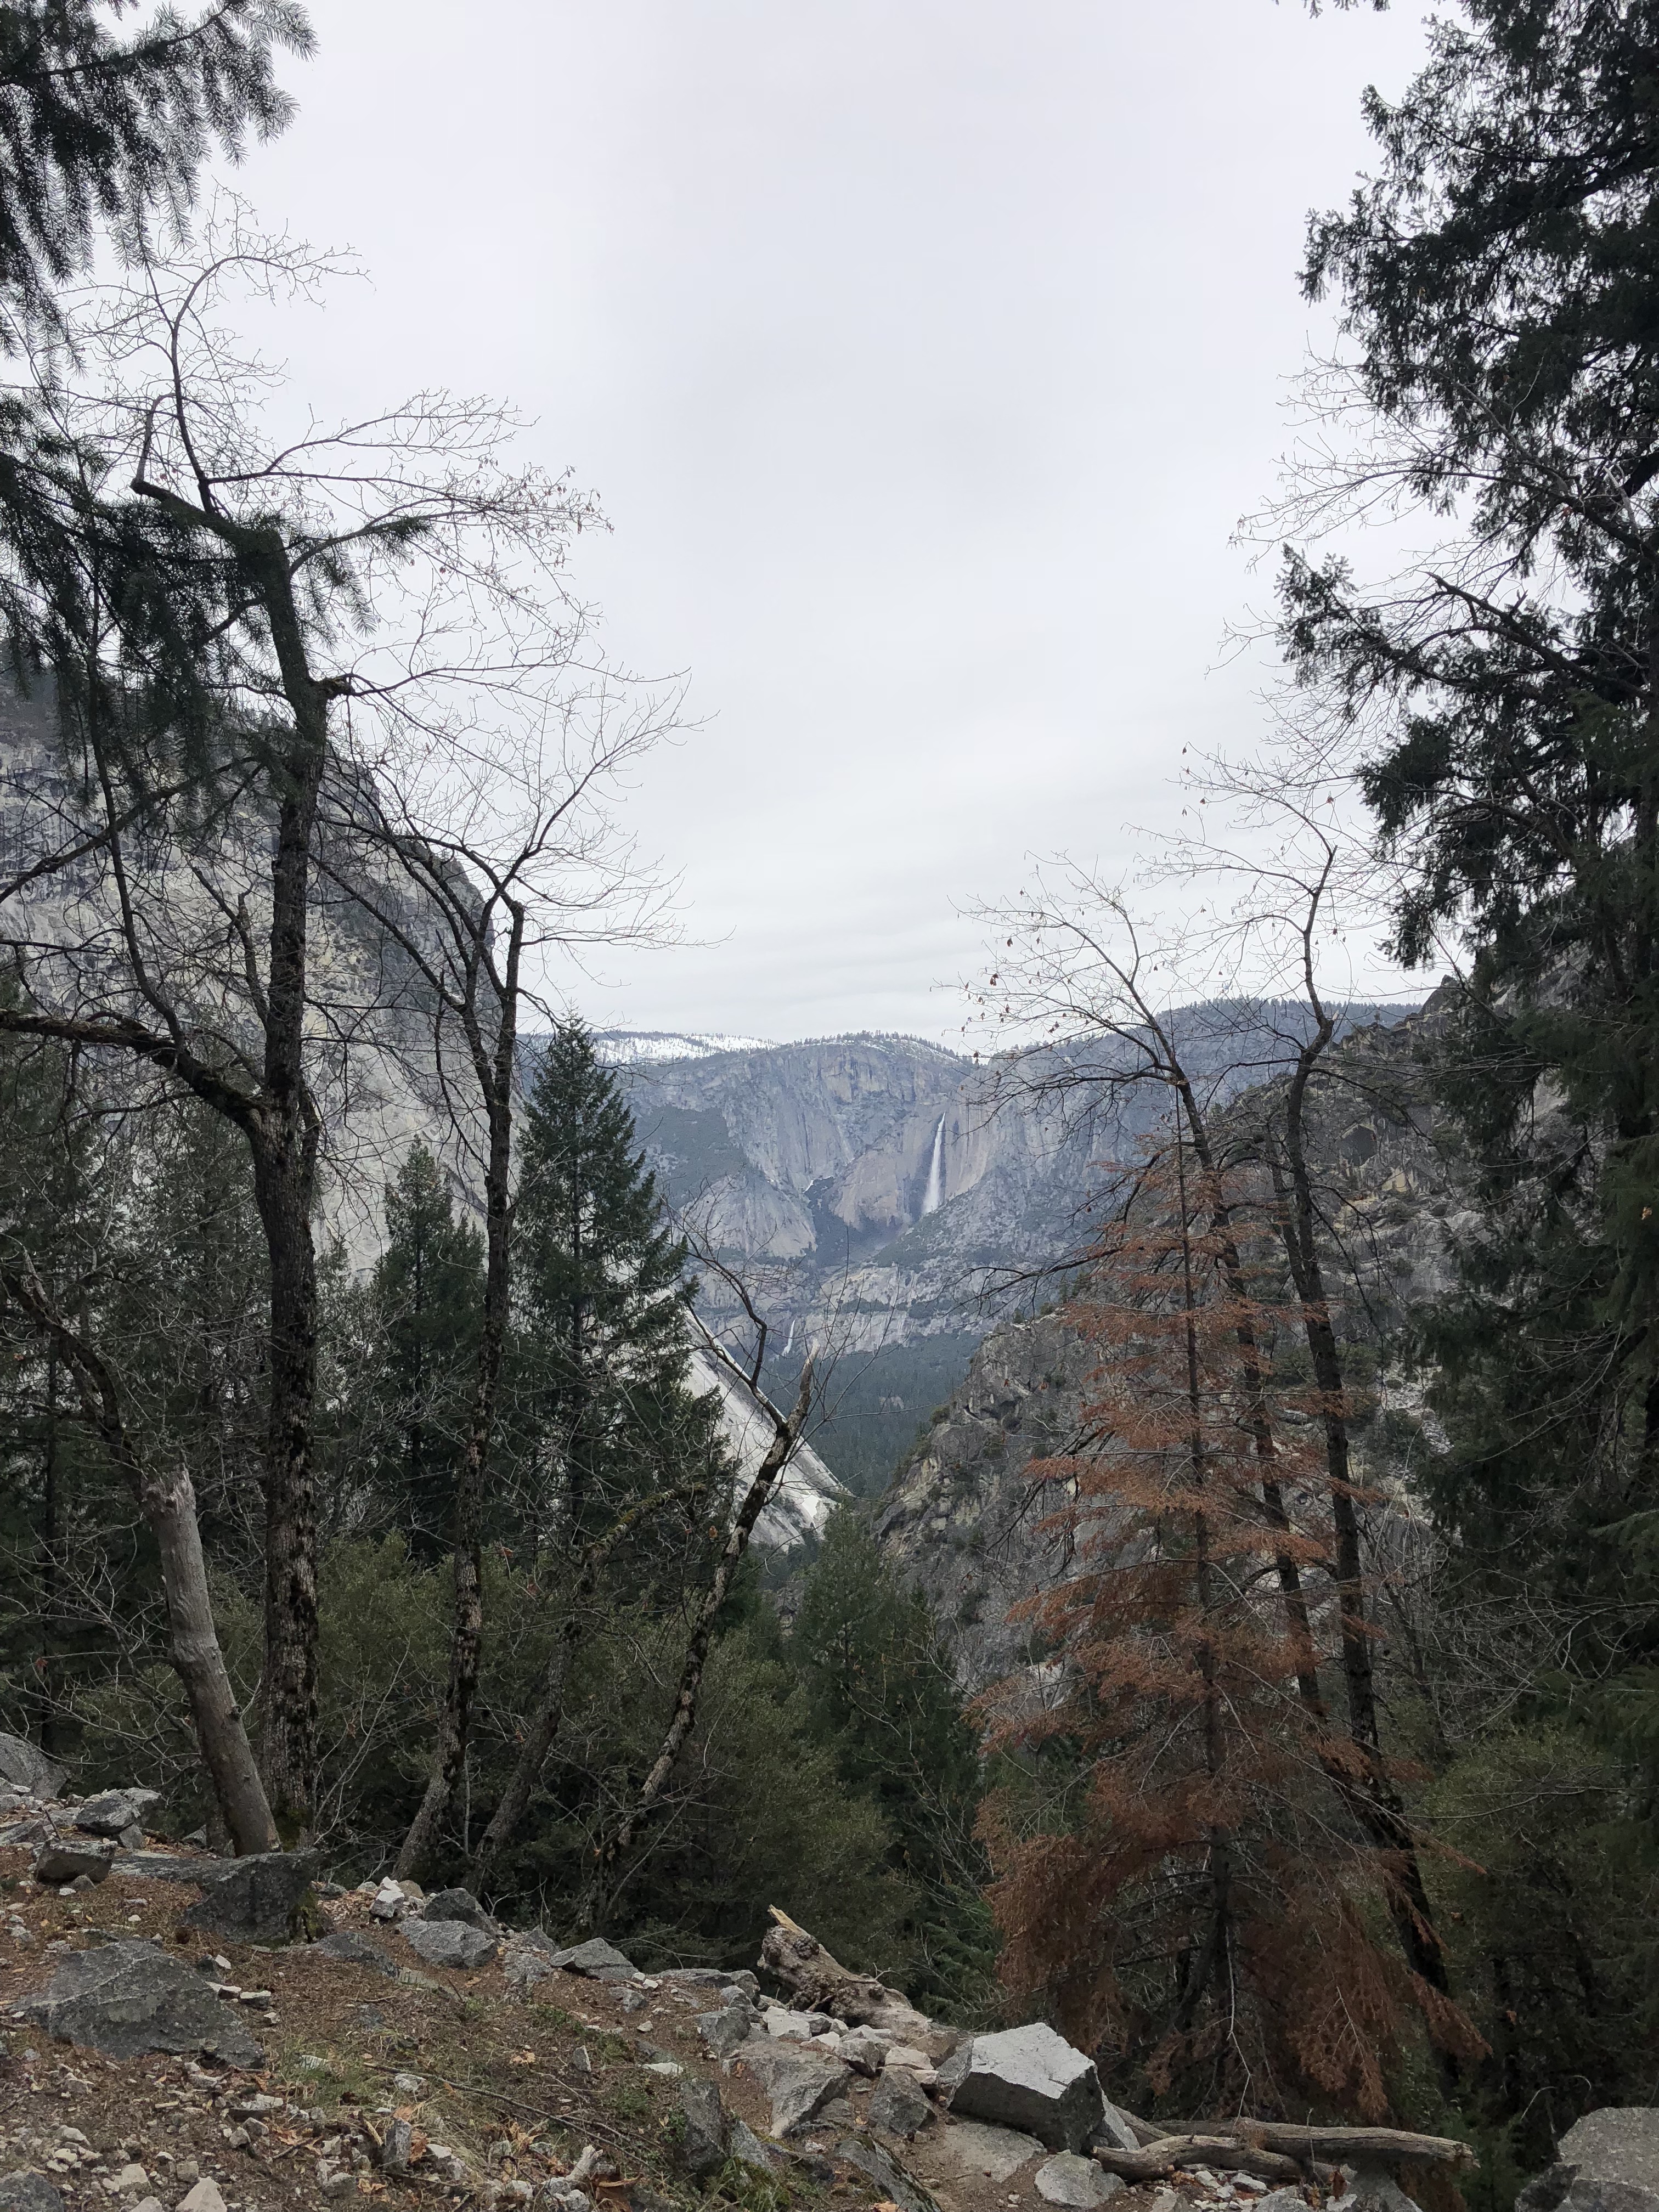 a view of a far-away waterfall in Yosemite National Park